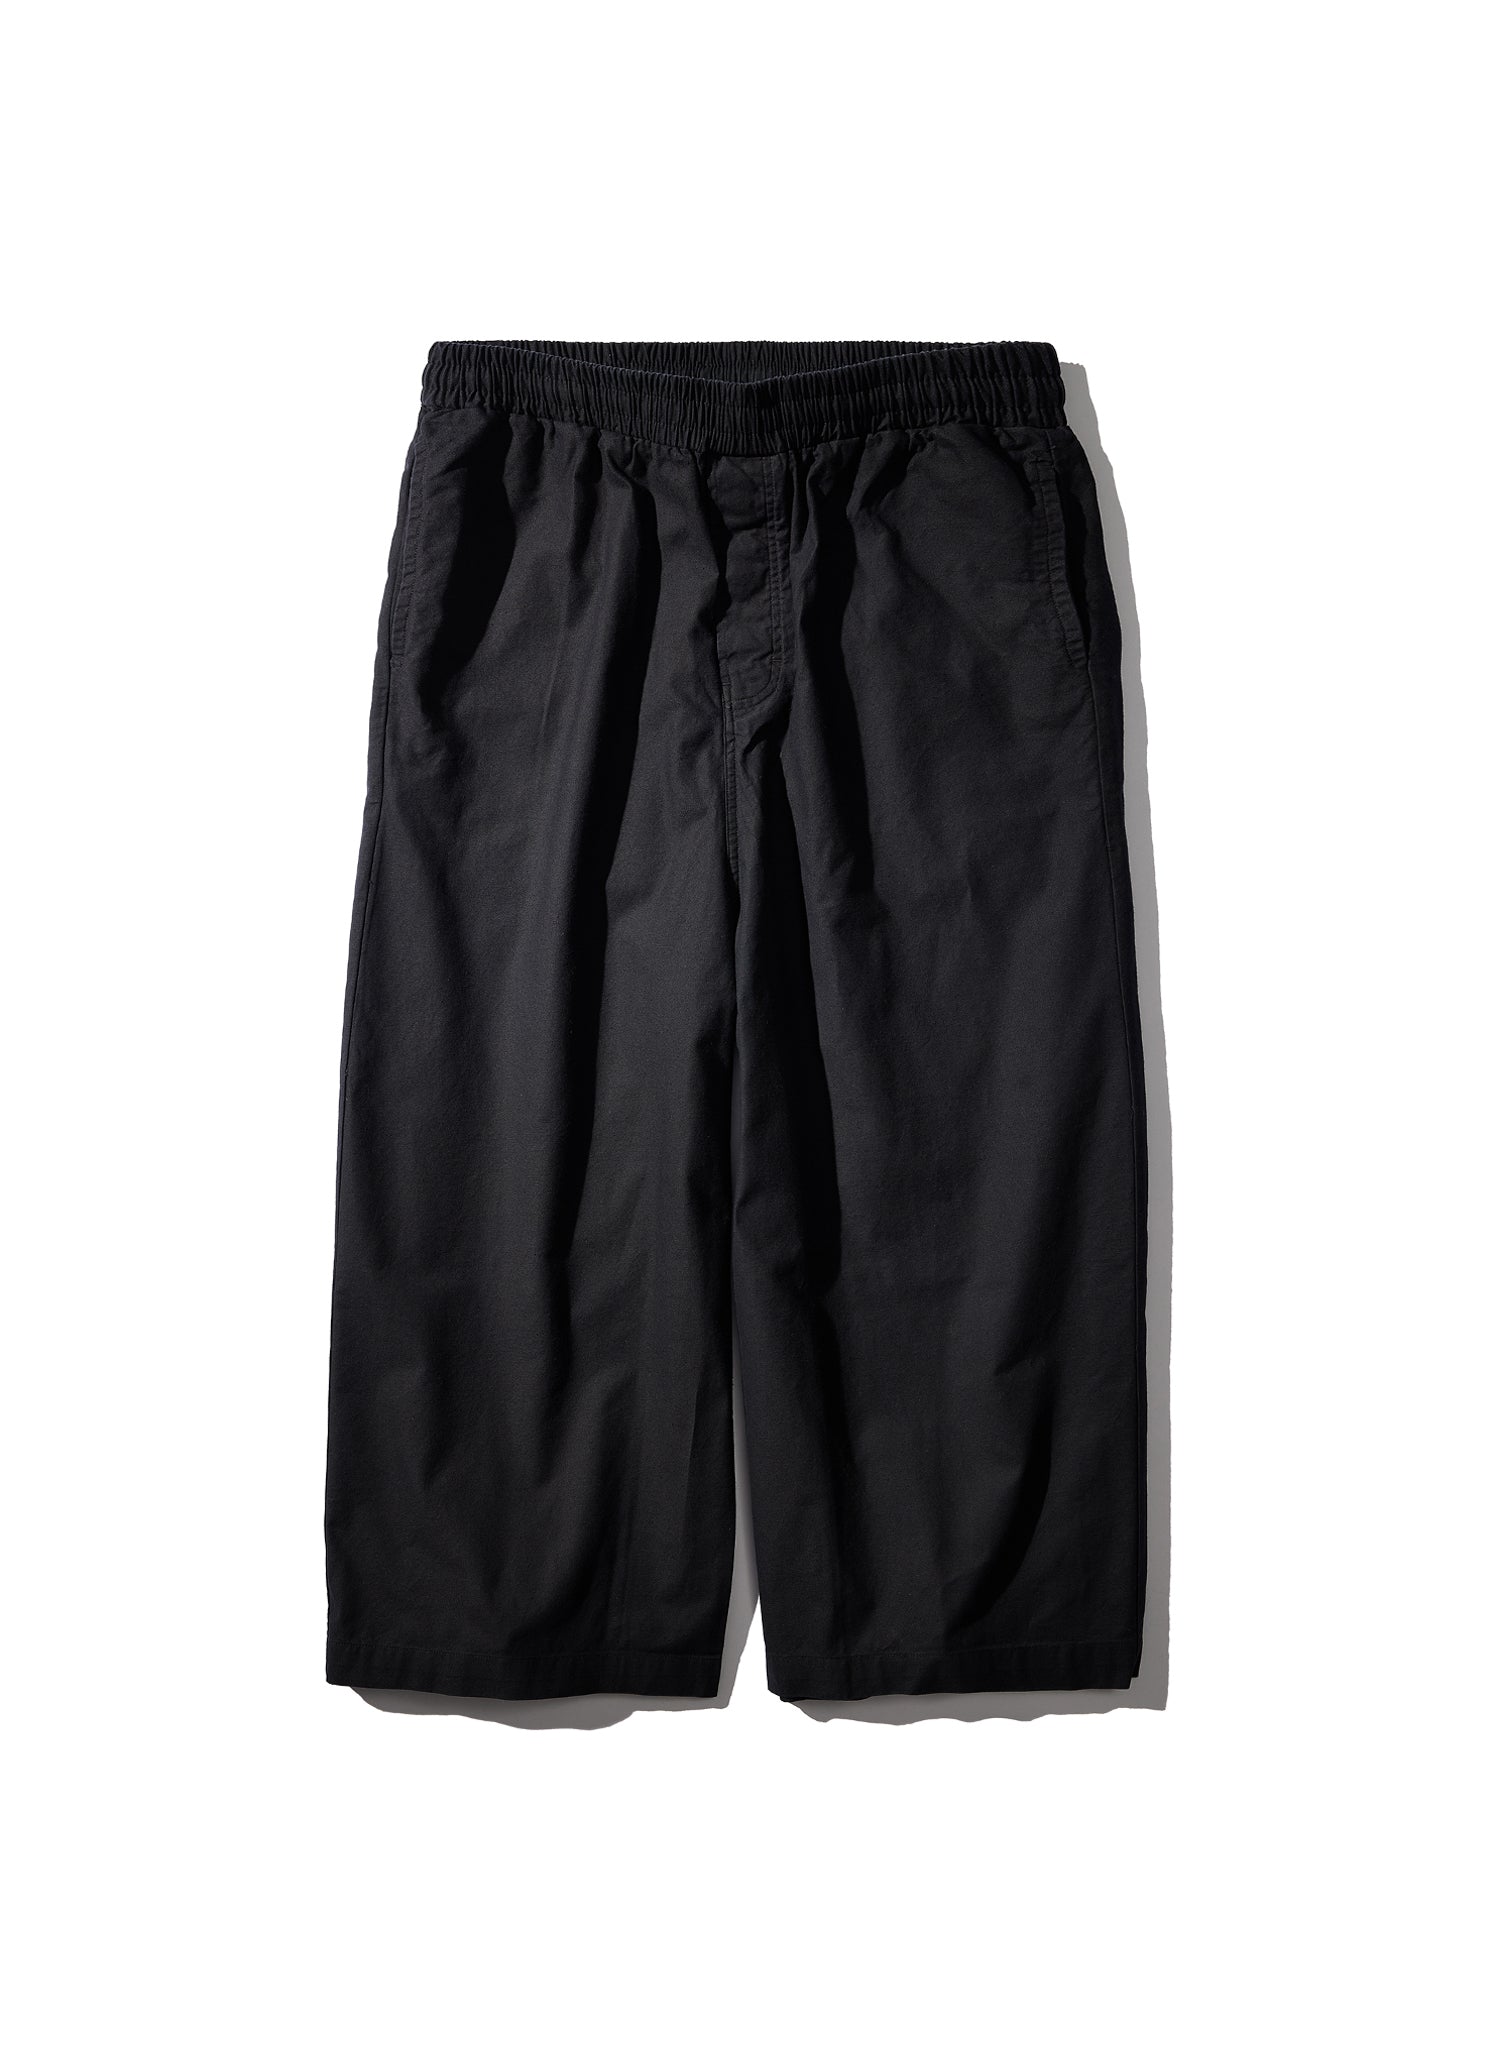 WILLY CHAVARRIA / JAIL PANTS BLACK